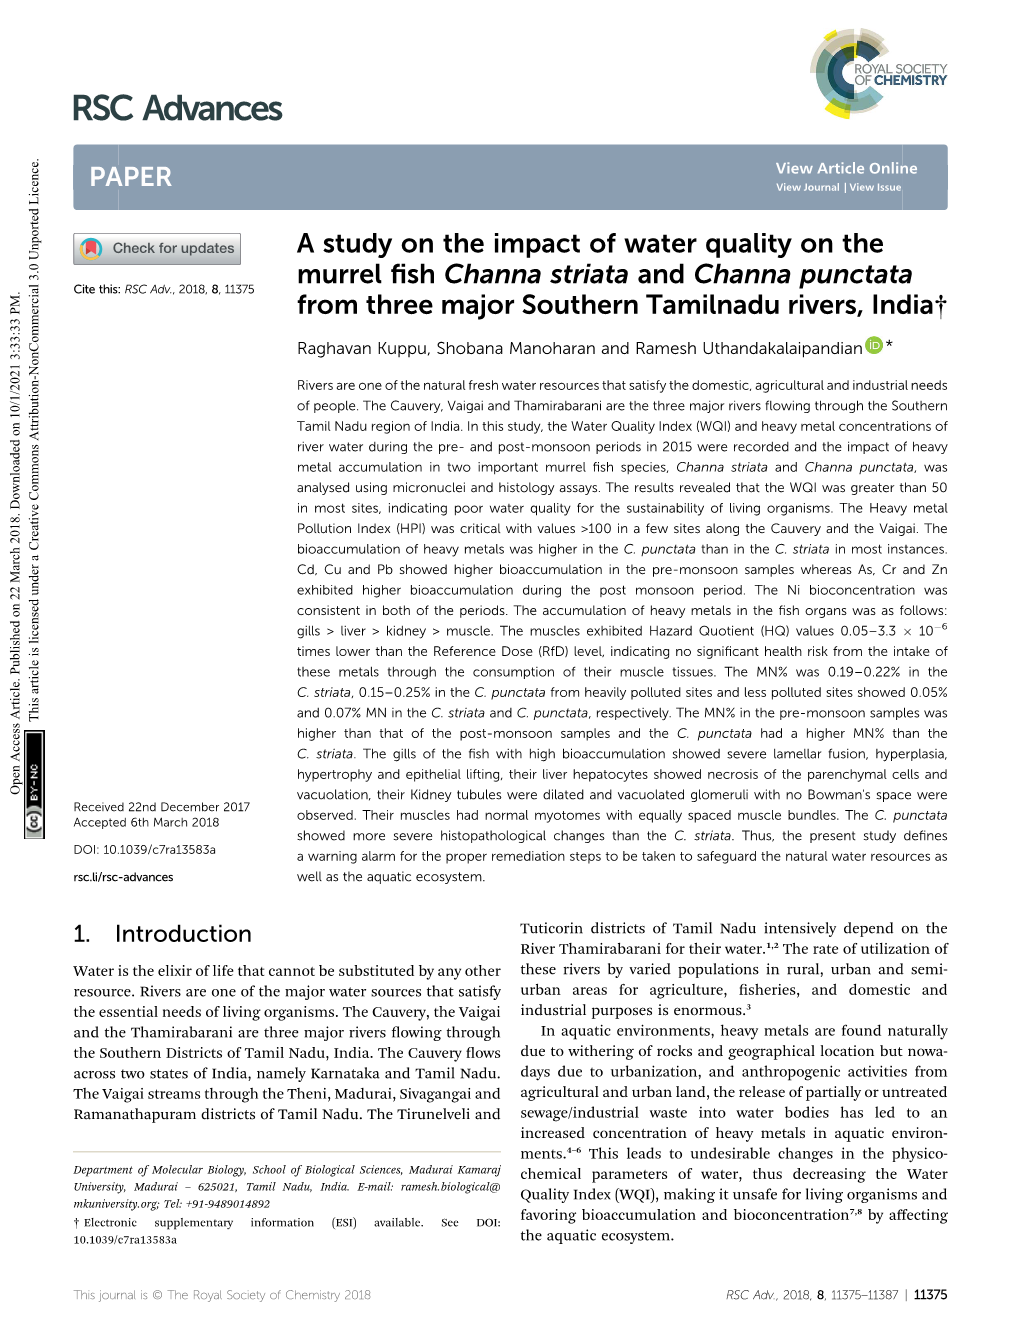 A Study on the Impact of Water Quality on the Murrel Fish Channa Striata